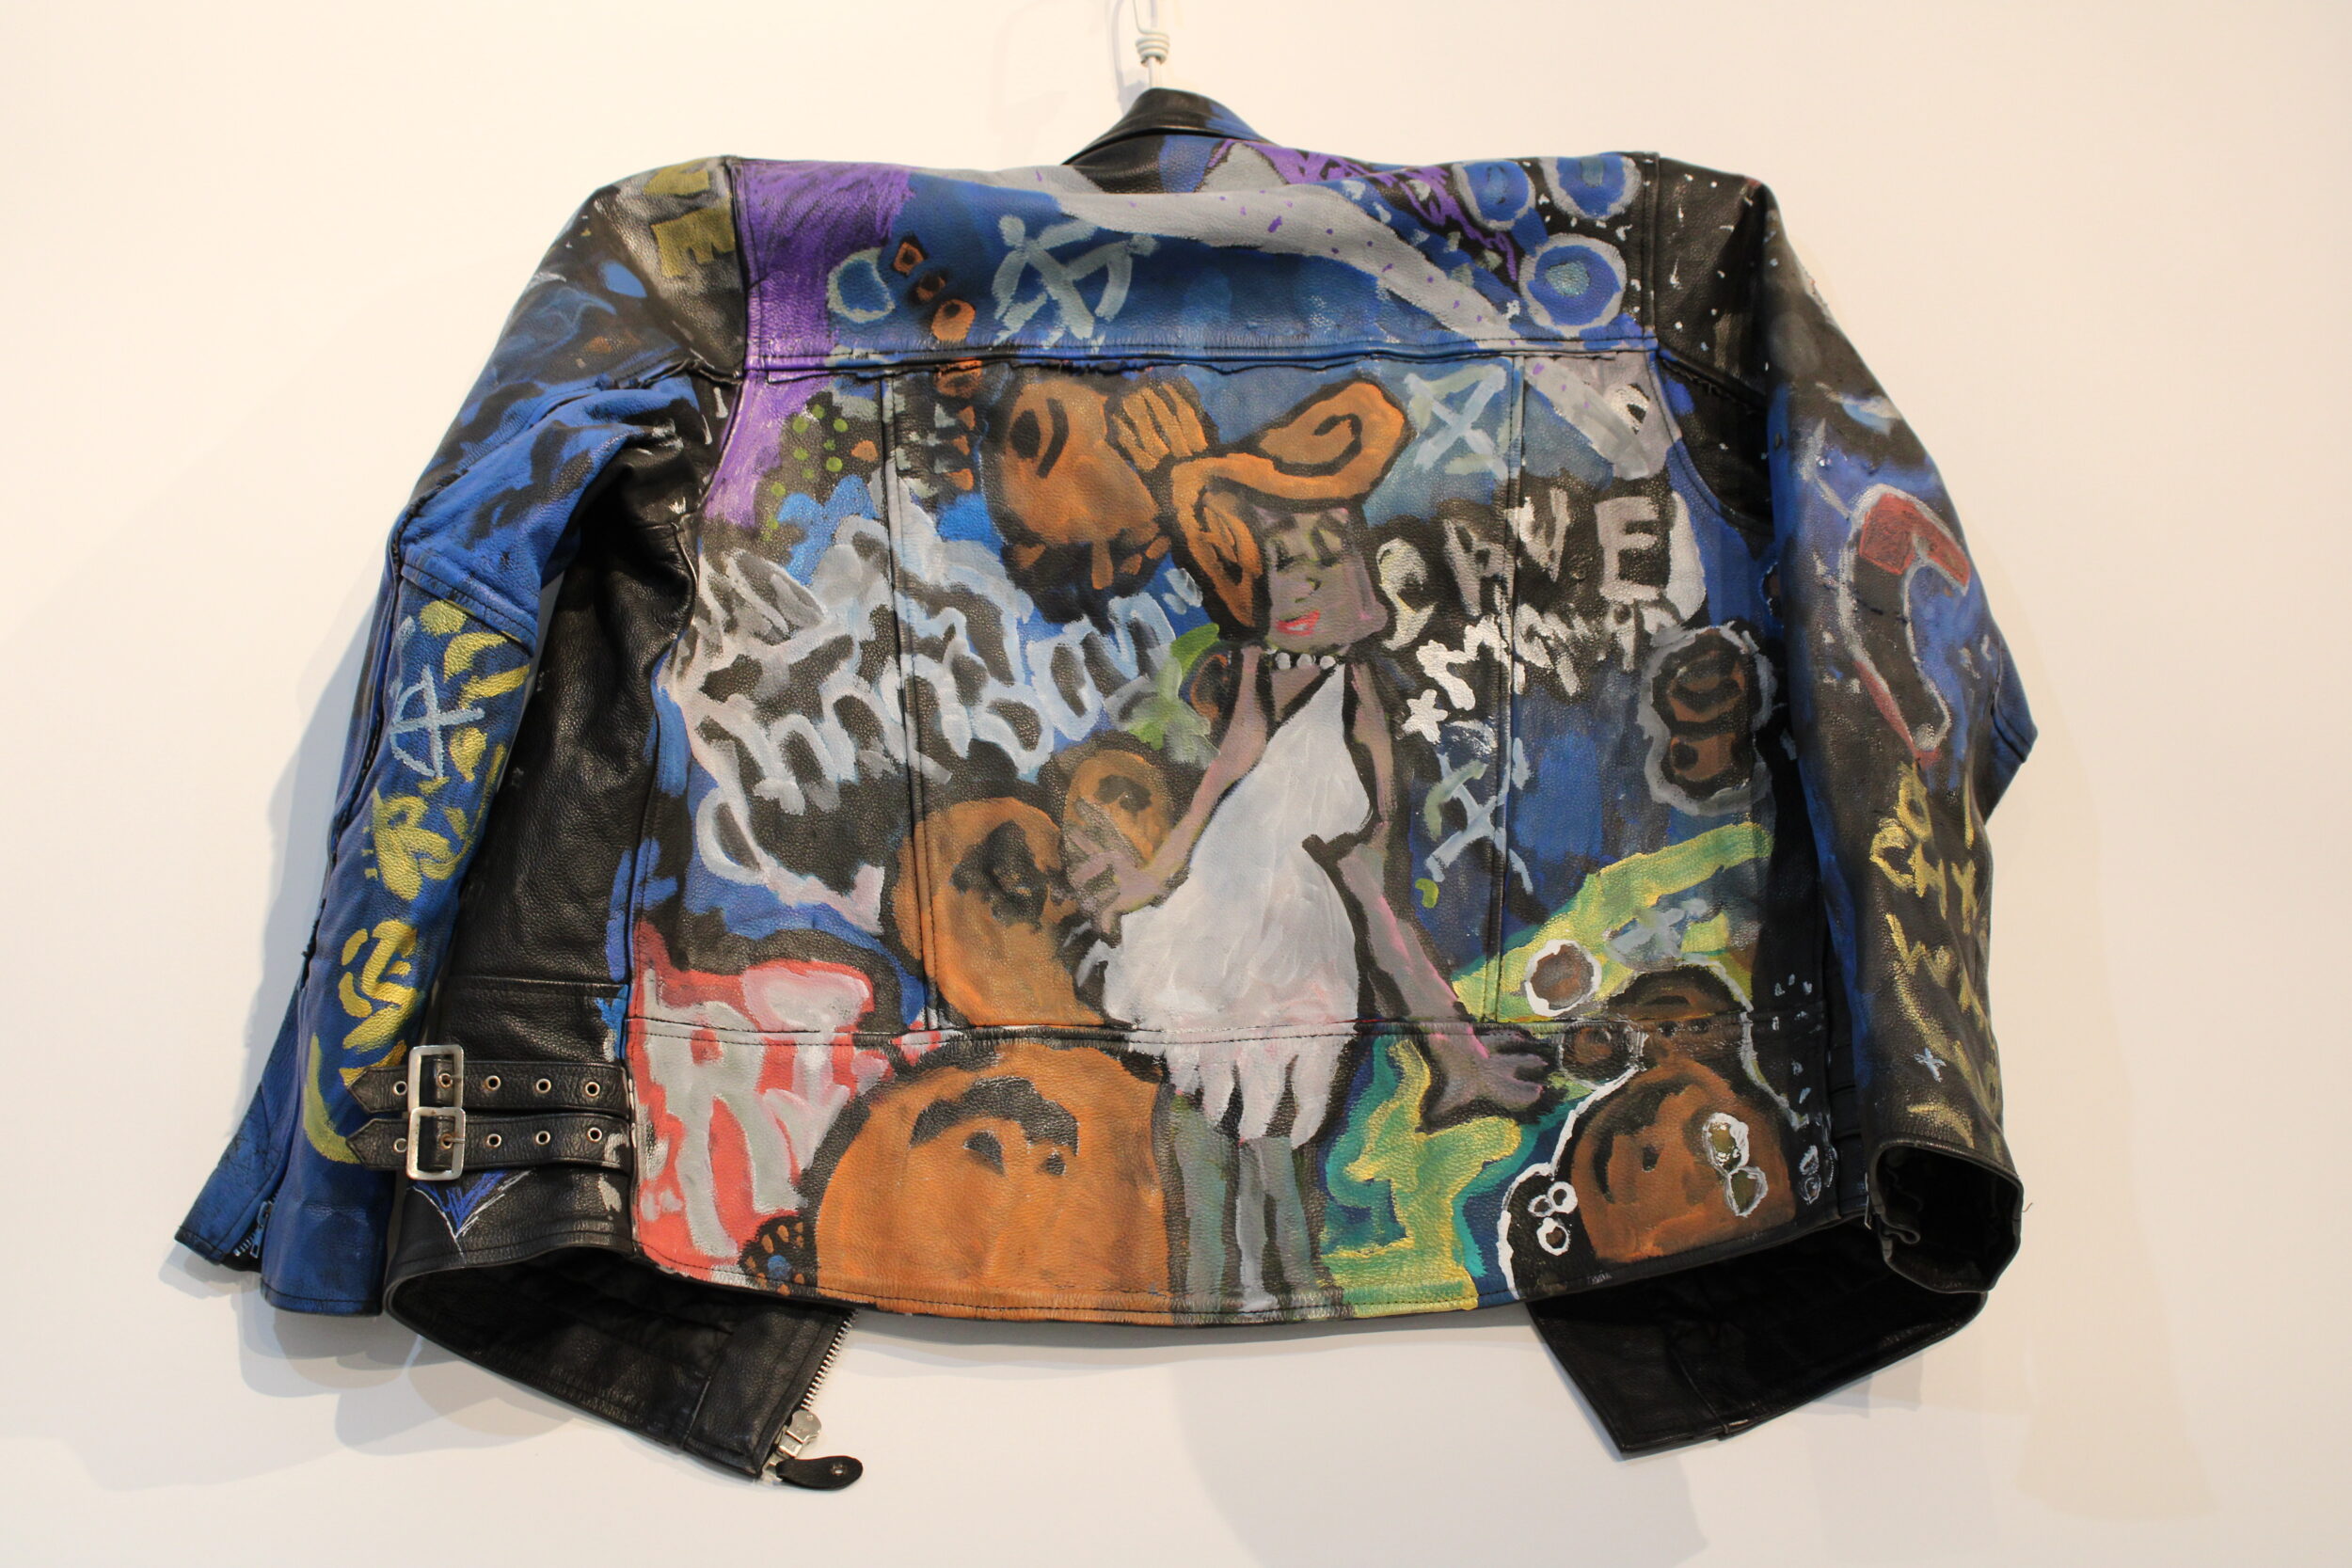 Lucy's customised leather jacket